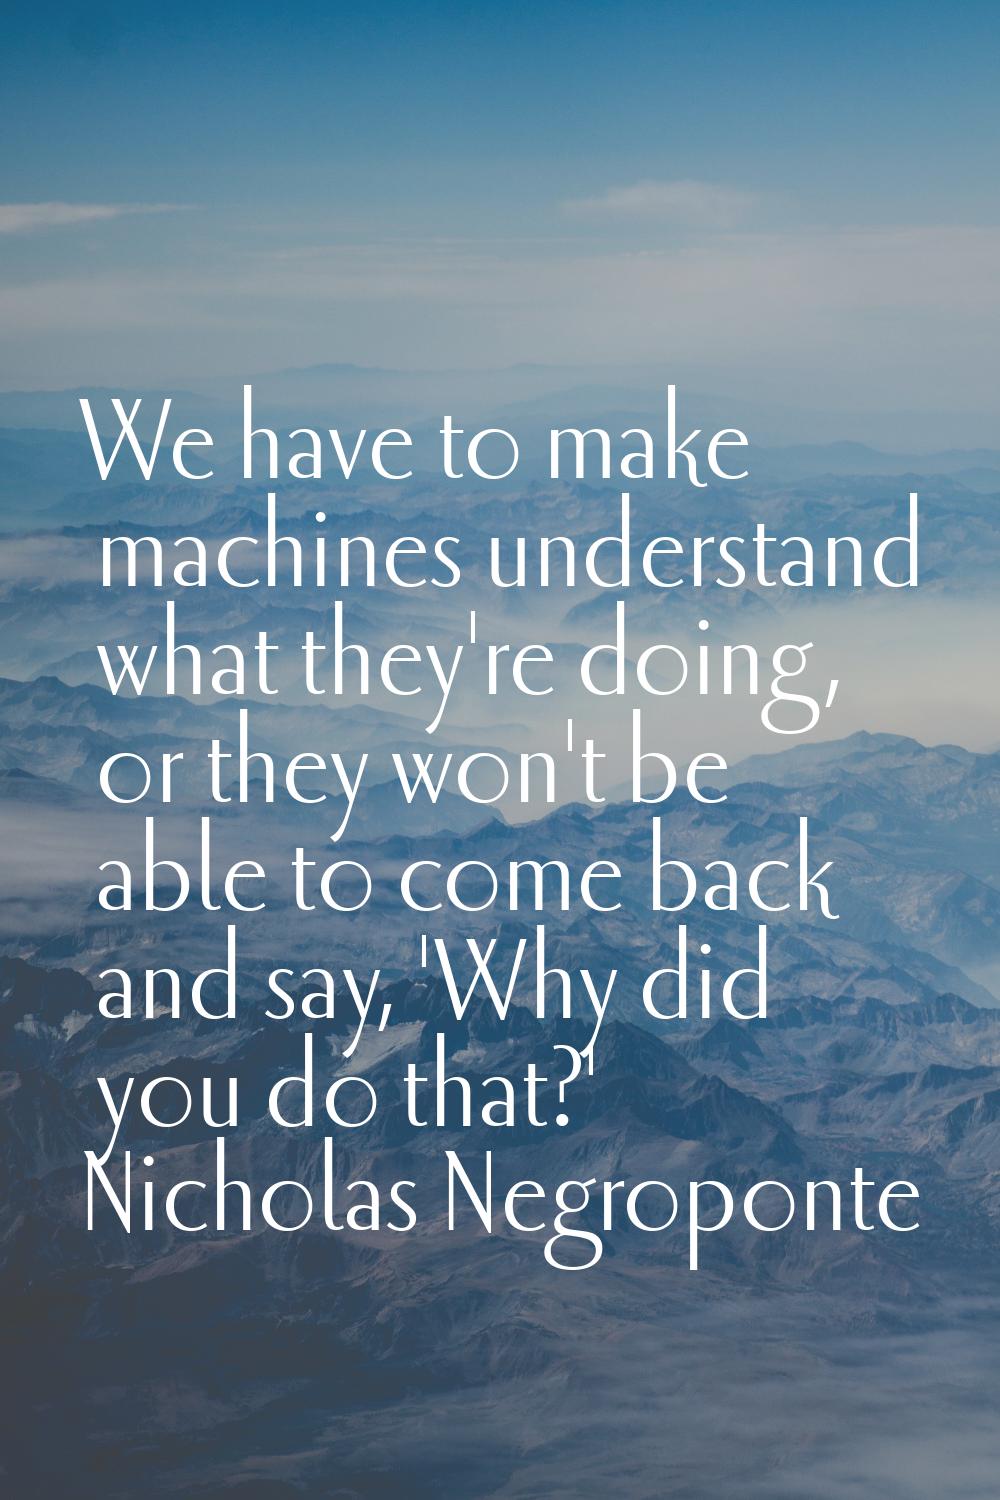 We have to make machines understand what they're doing, or they won't be able to come back and say,